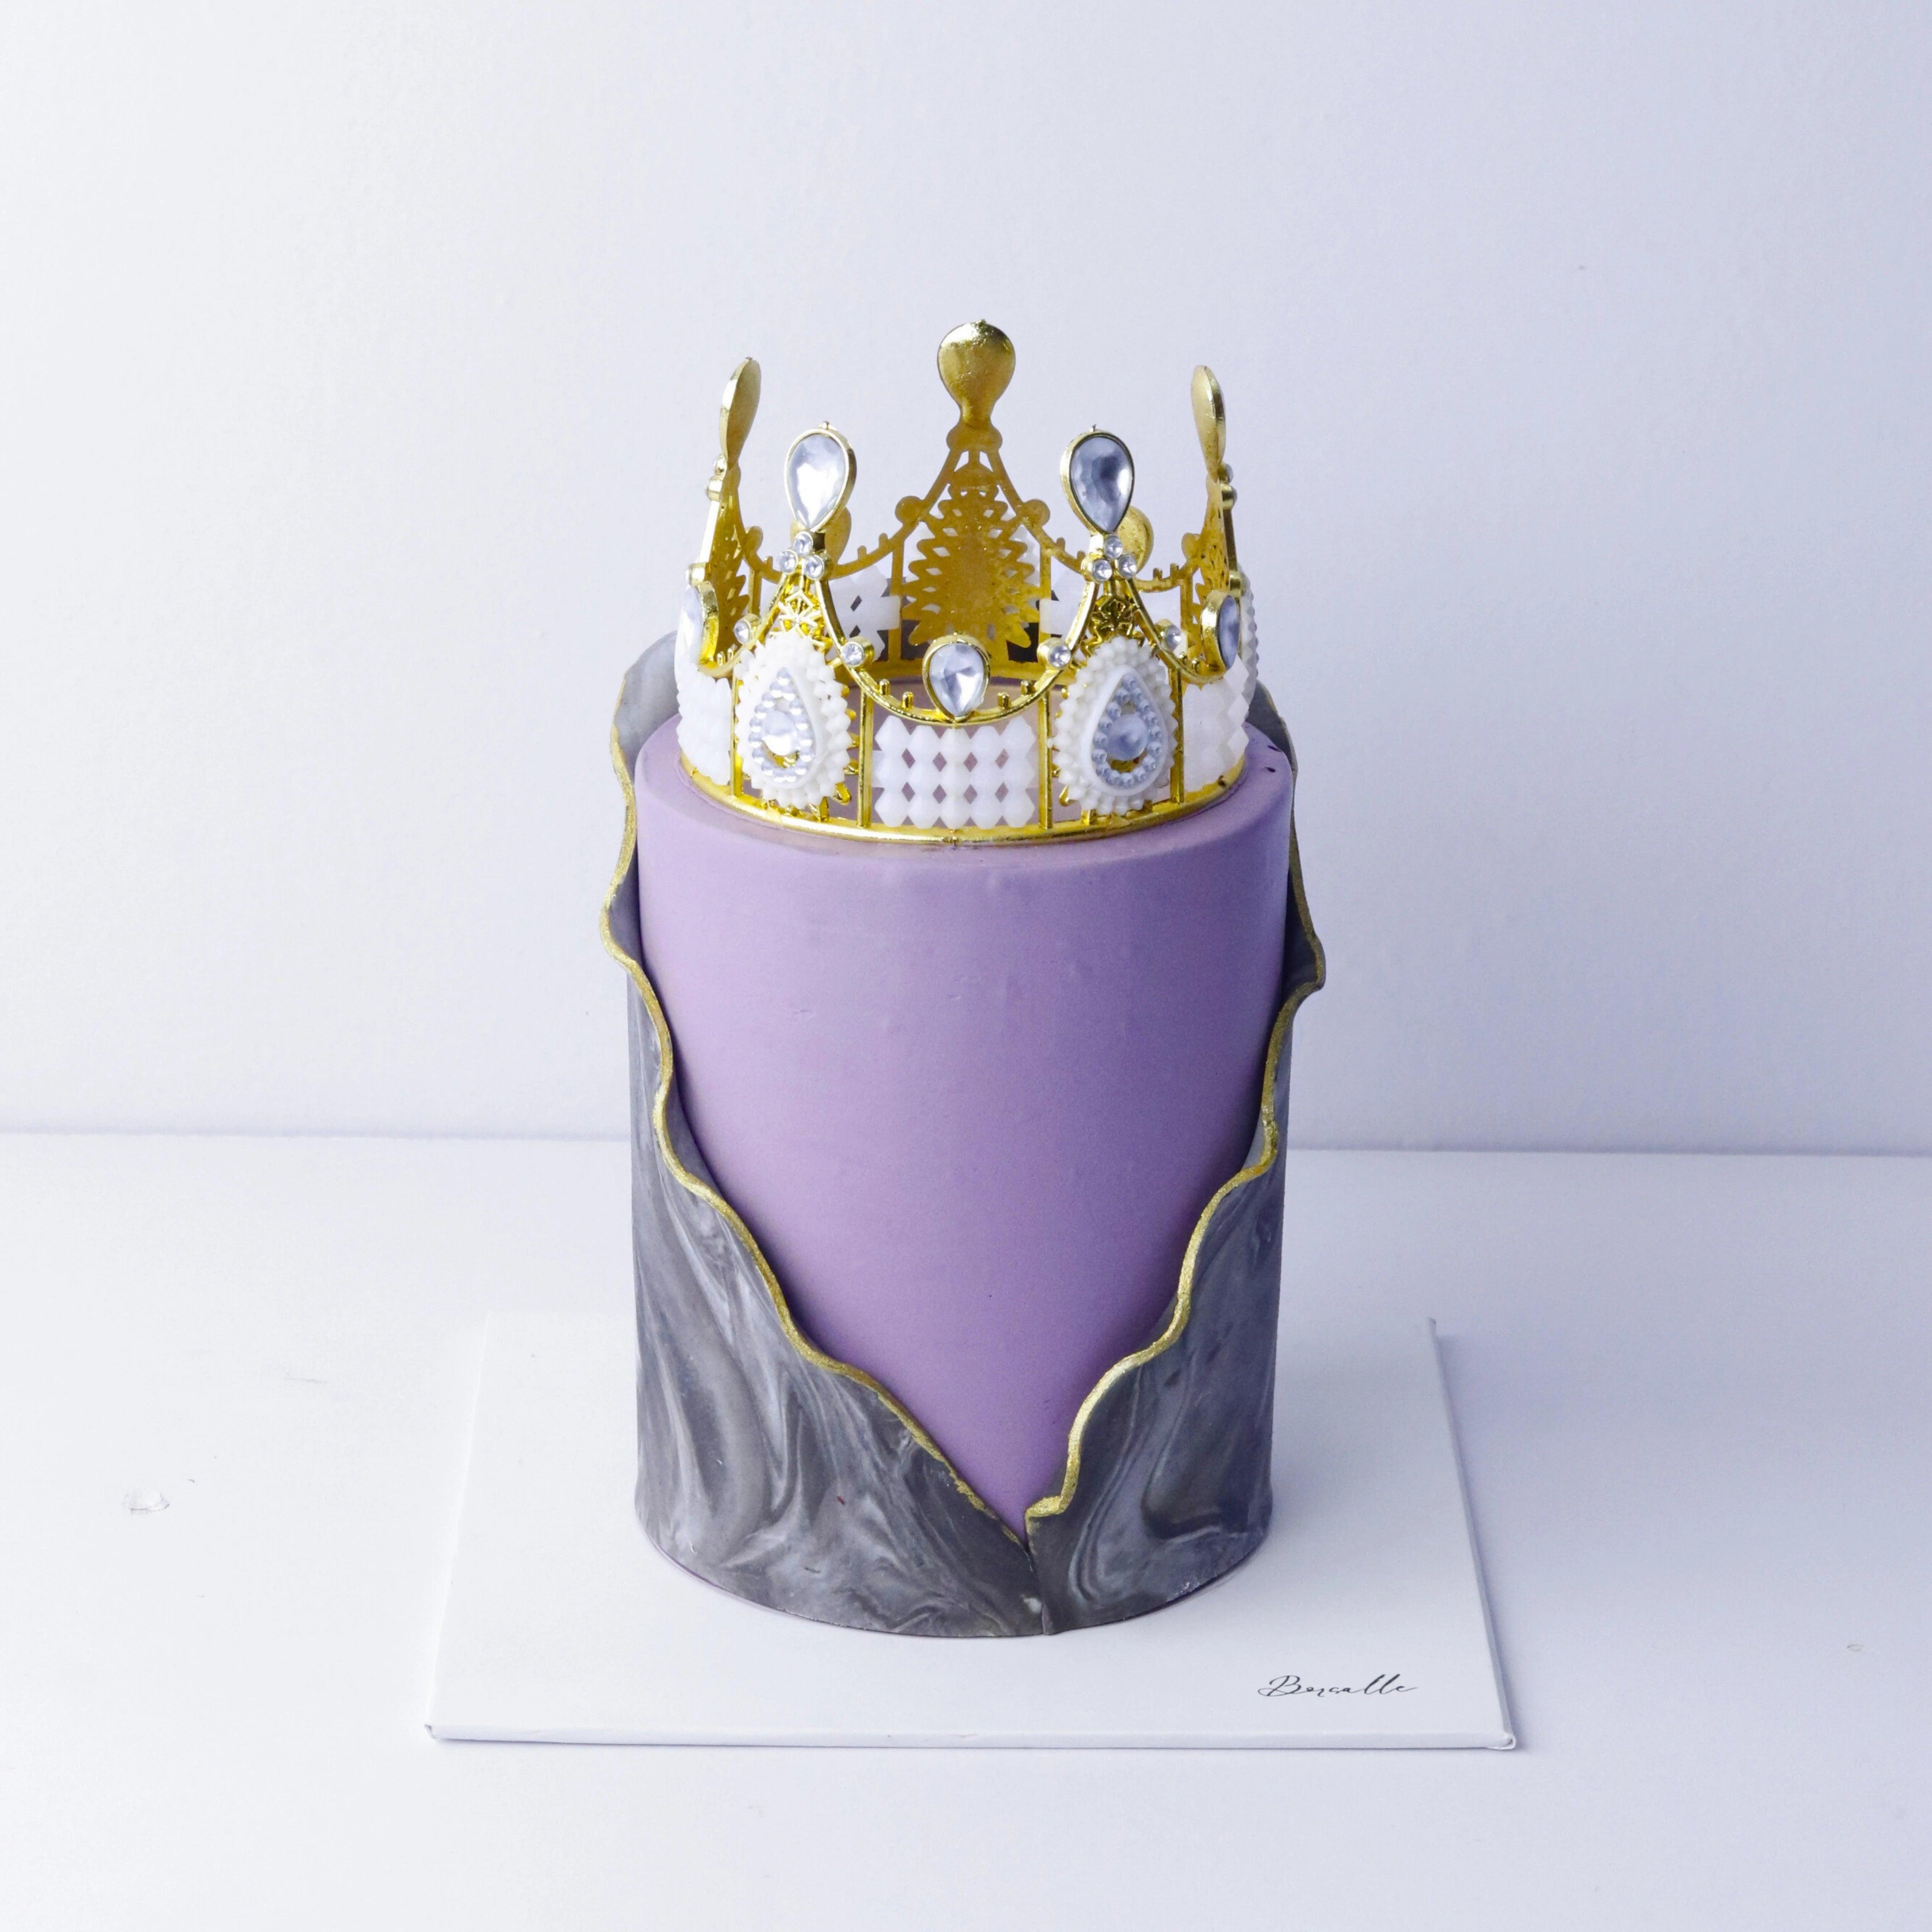 Queen theme customized cake with crown for fiance's birthday